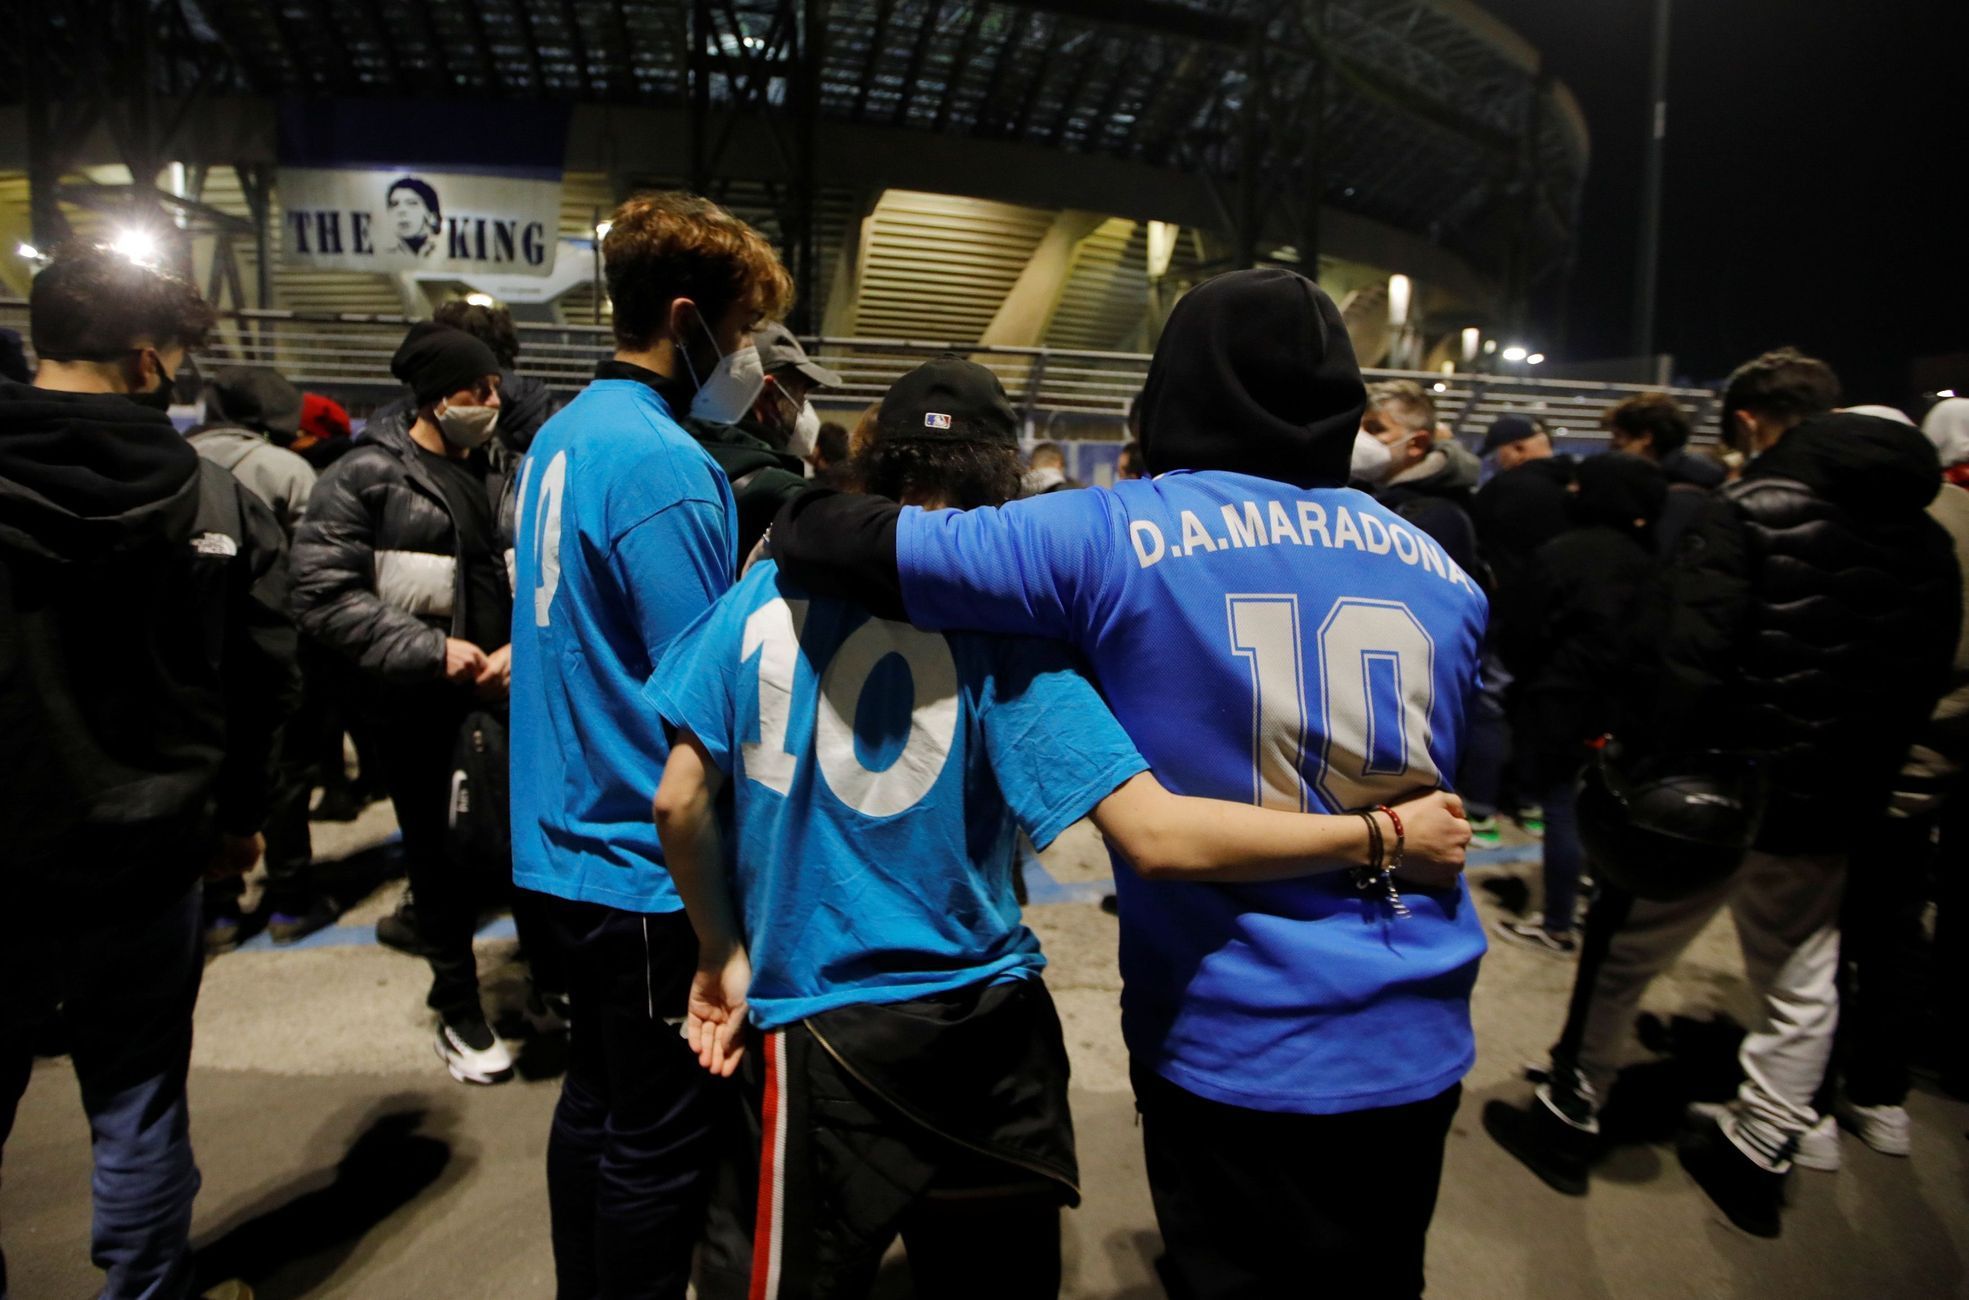 People gather to mourn the death of Argentine soccer legend Diego Maradona outside San Paolo stadium in Naples